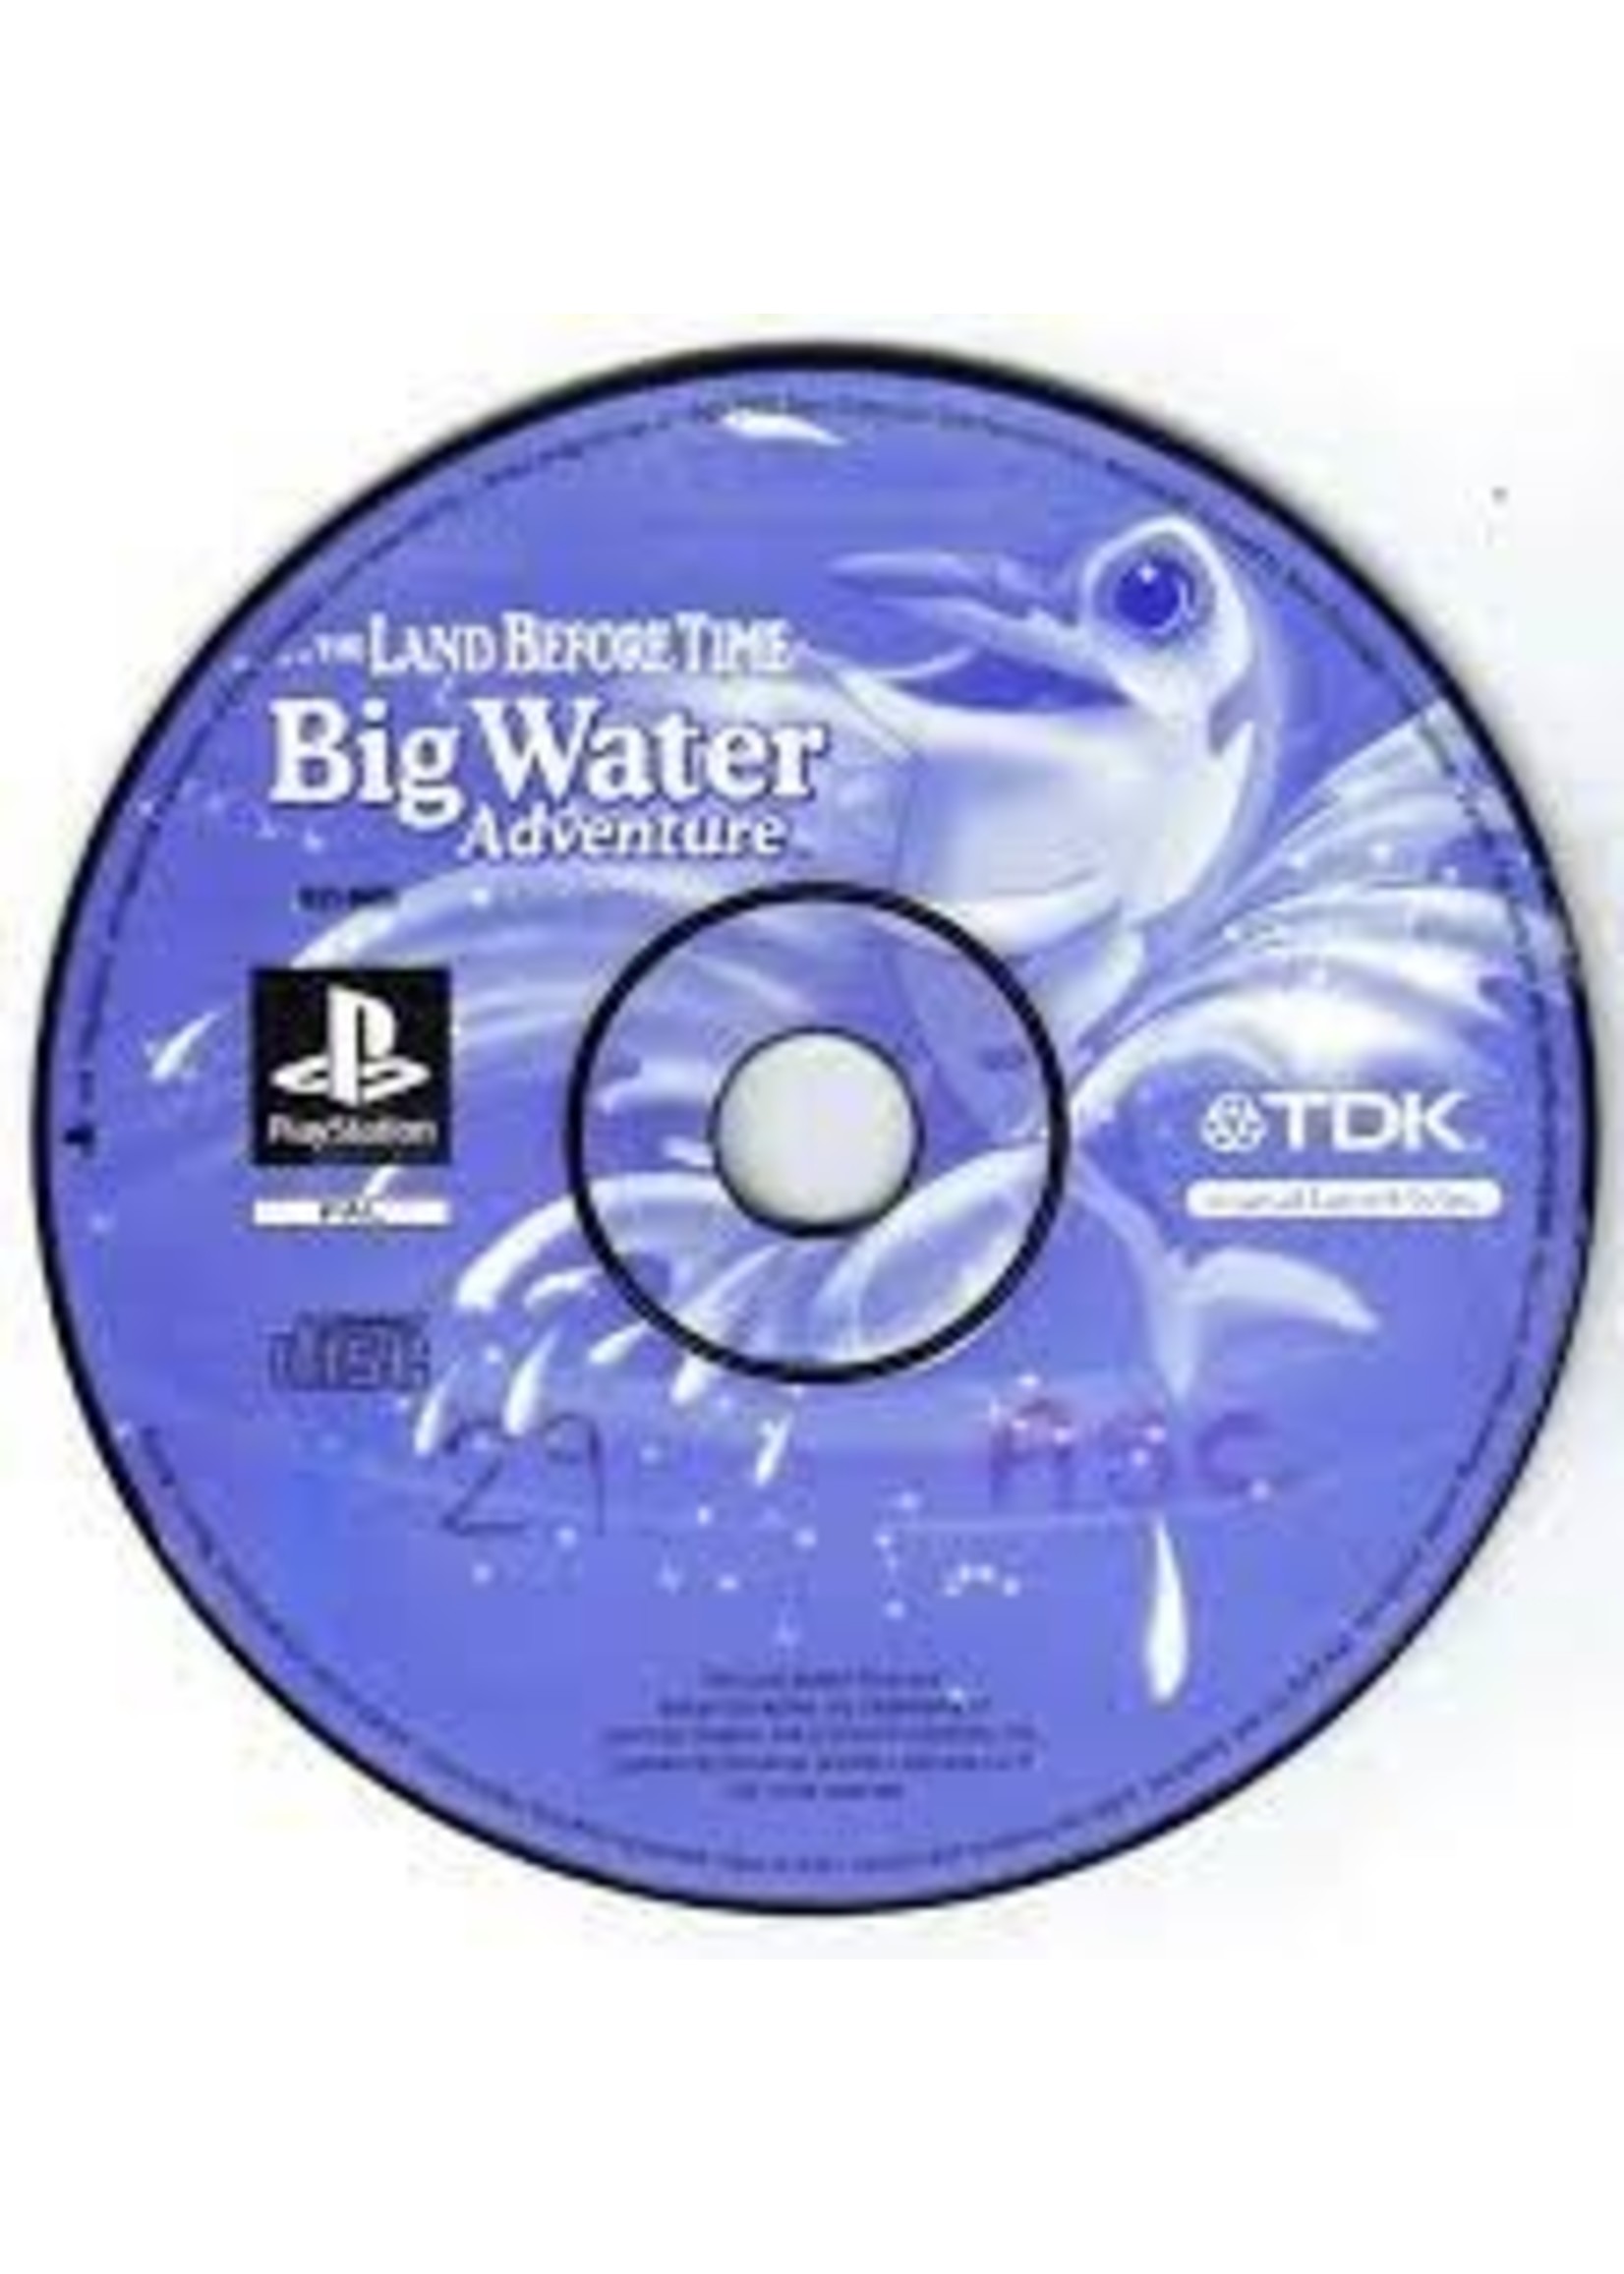 Sony Playstation 1 (PS1) Land Before Time Big Water Adventure - Print